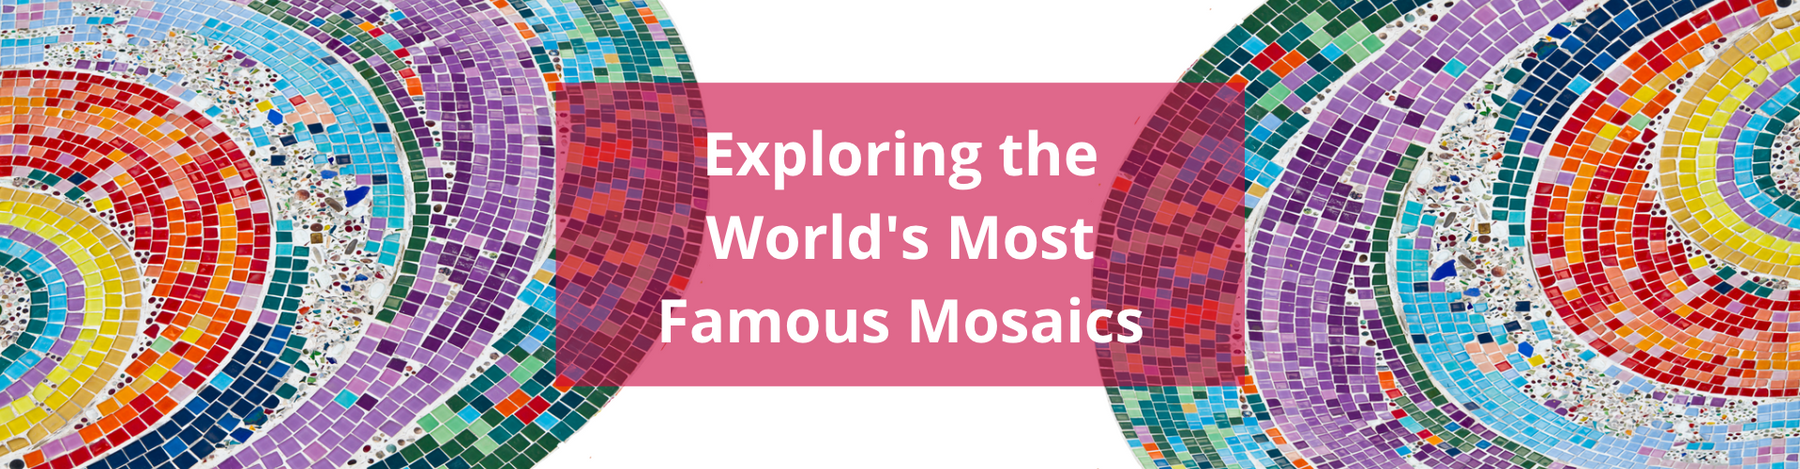 Exploring the World's Most Famous Mosaics